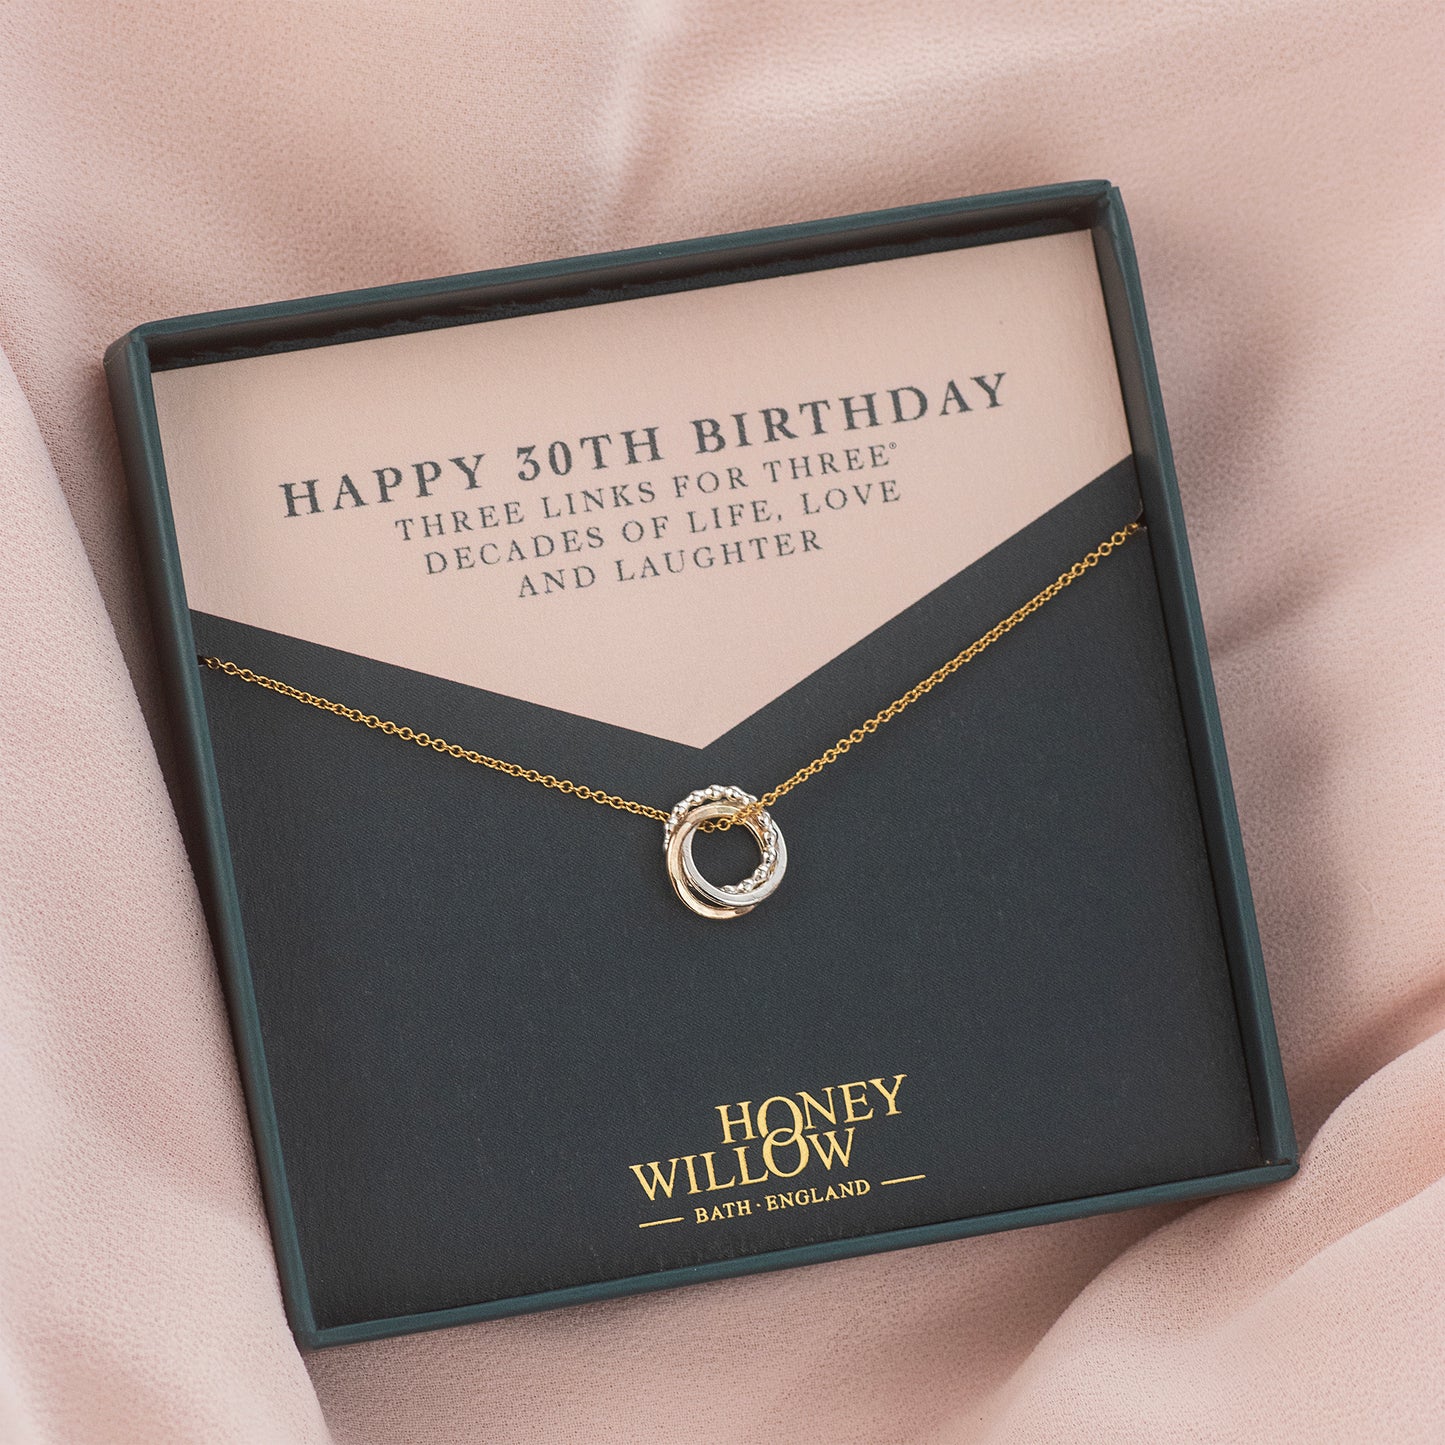 30th Birthday Necklace - Silver & Gold Love Knot - The Original 3 Links for 3 Decades Necklace